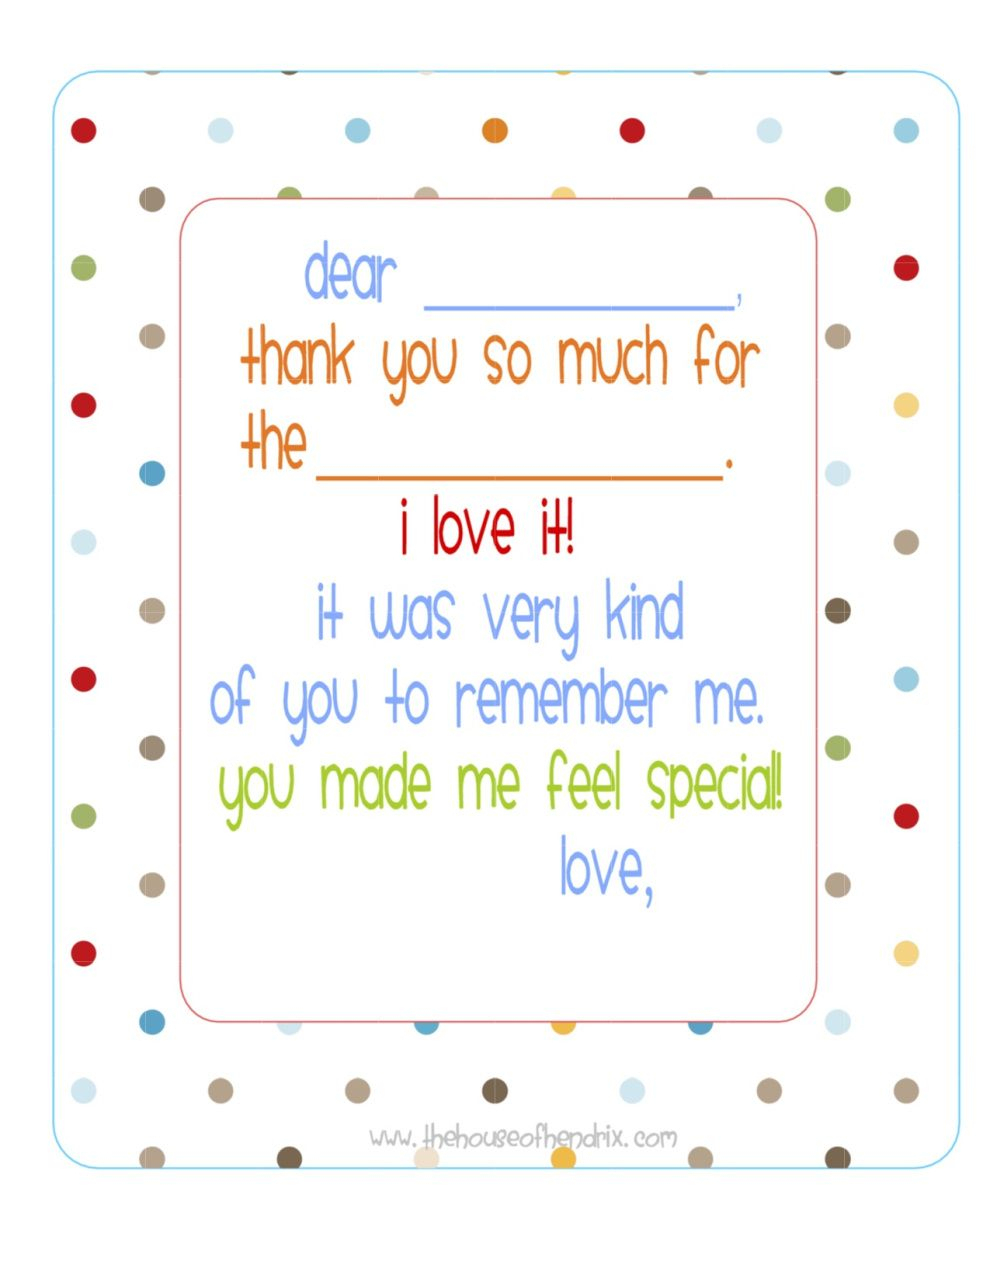 Free} Printable Fill In The Blank Thank You Note (Polka Dots) | Misc - Fill In The Blank Thank You Cards Printable Free